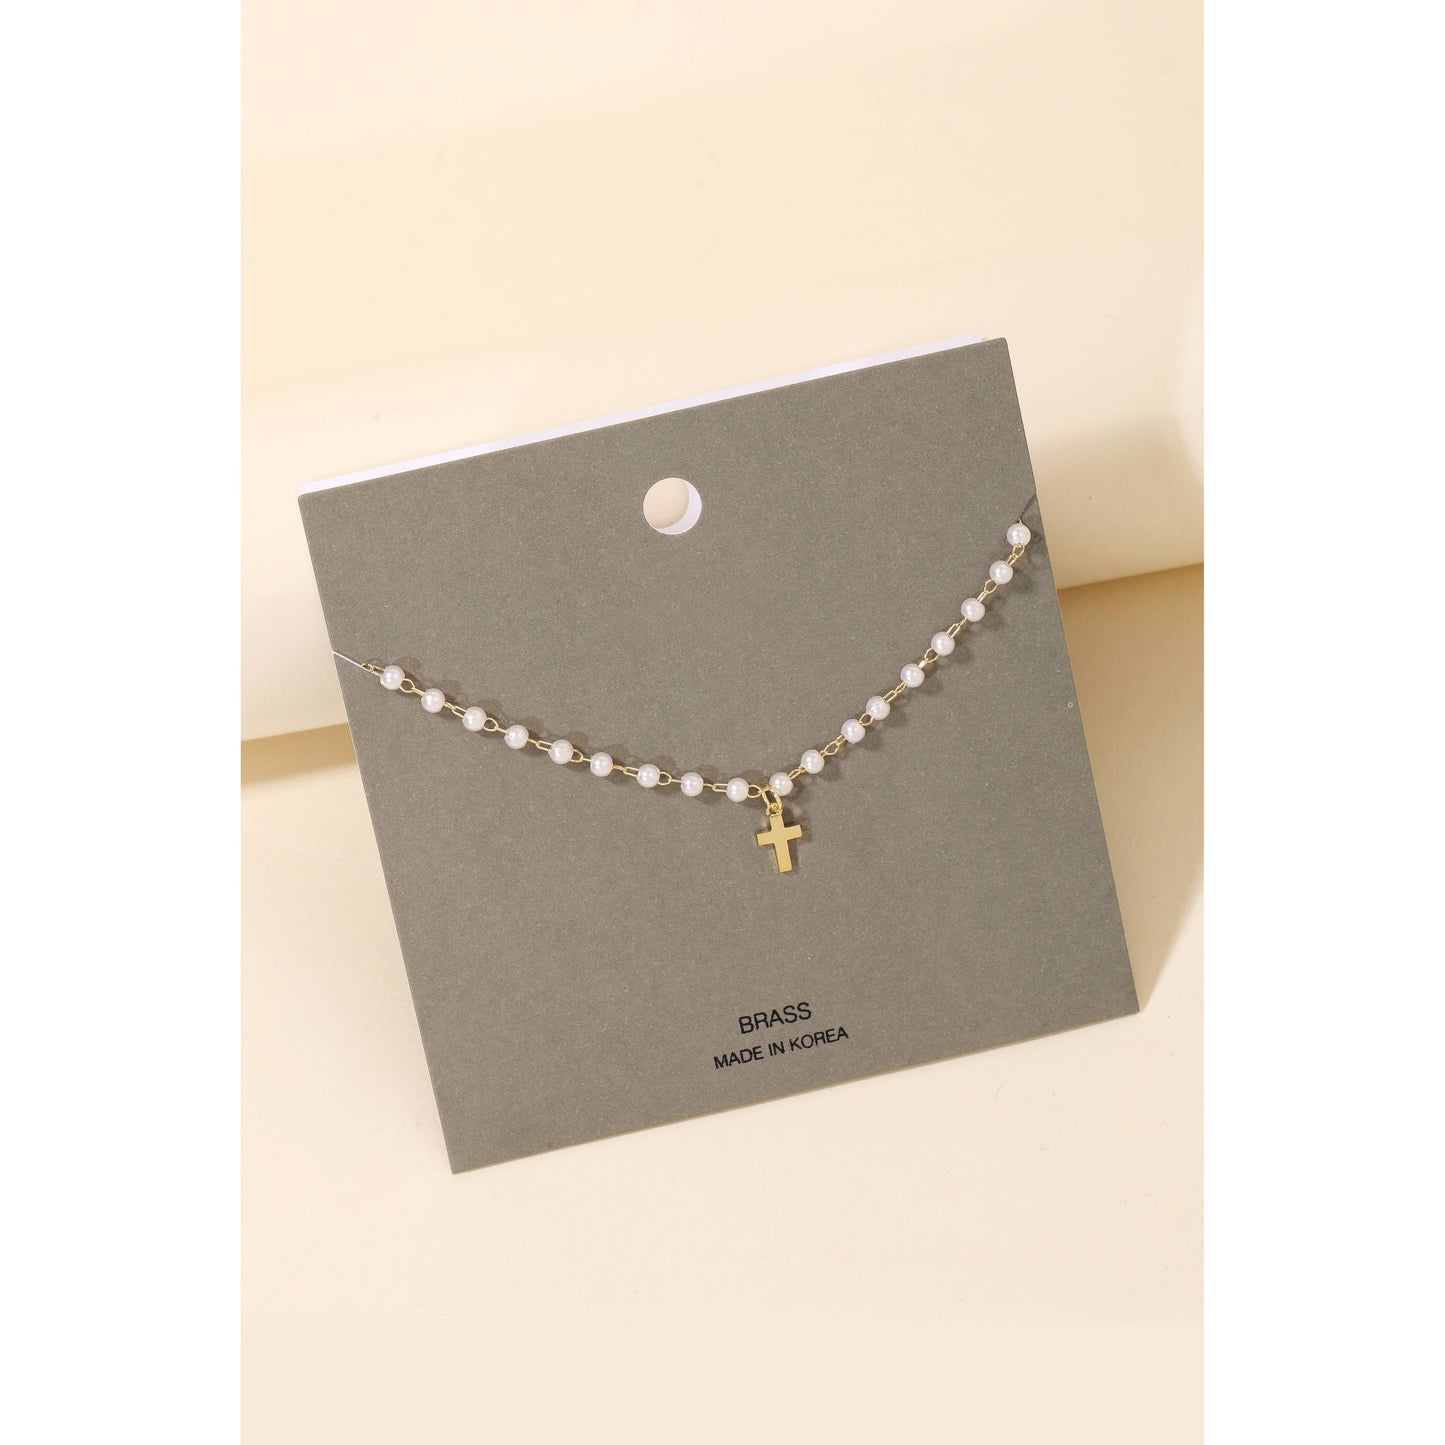 Cross Pendant Pearl Beaded Chain Necklace